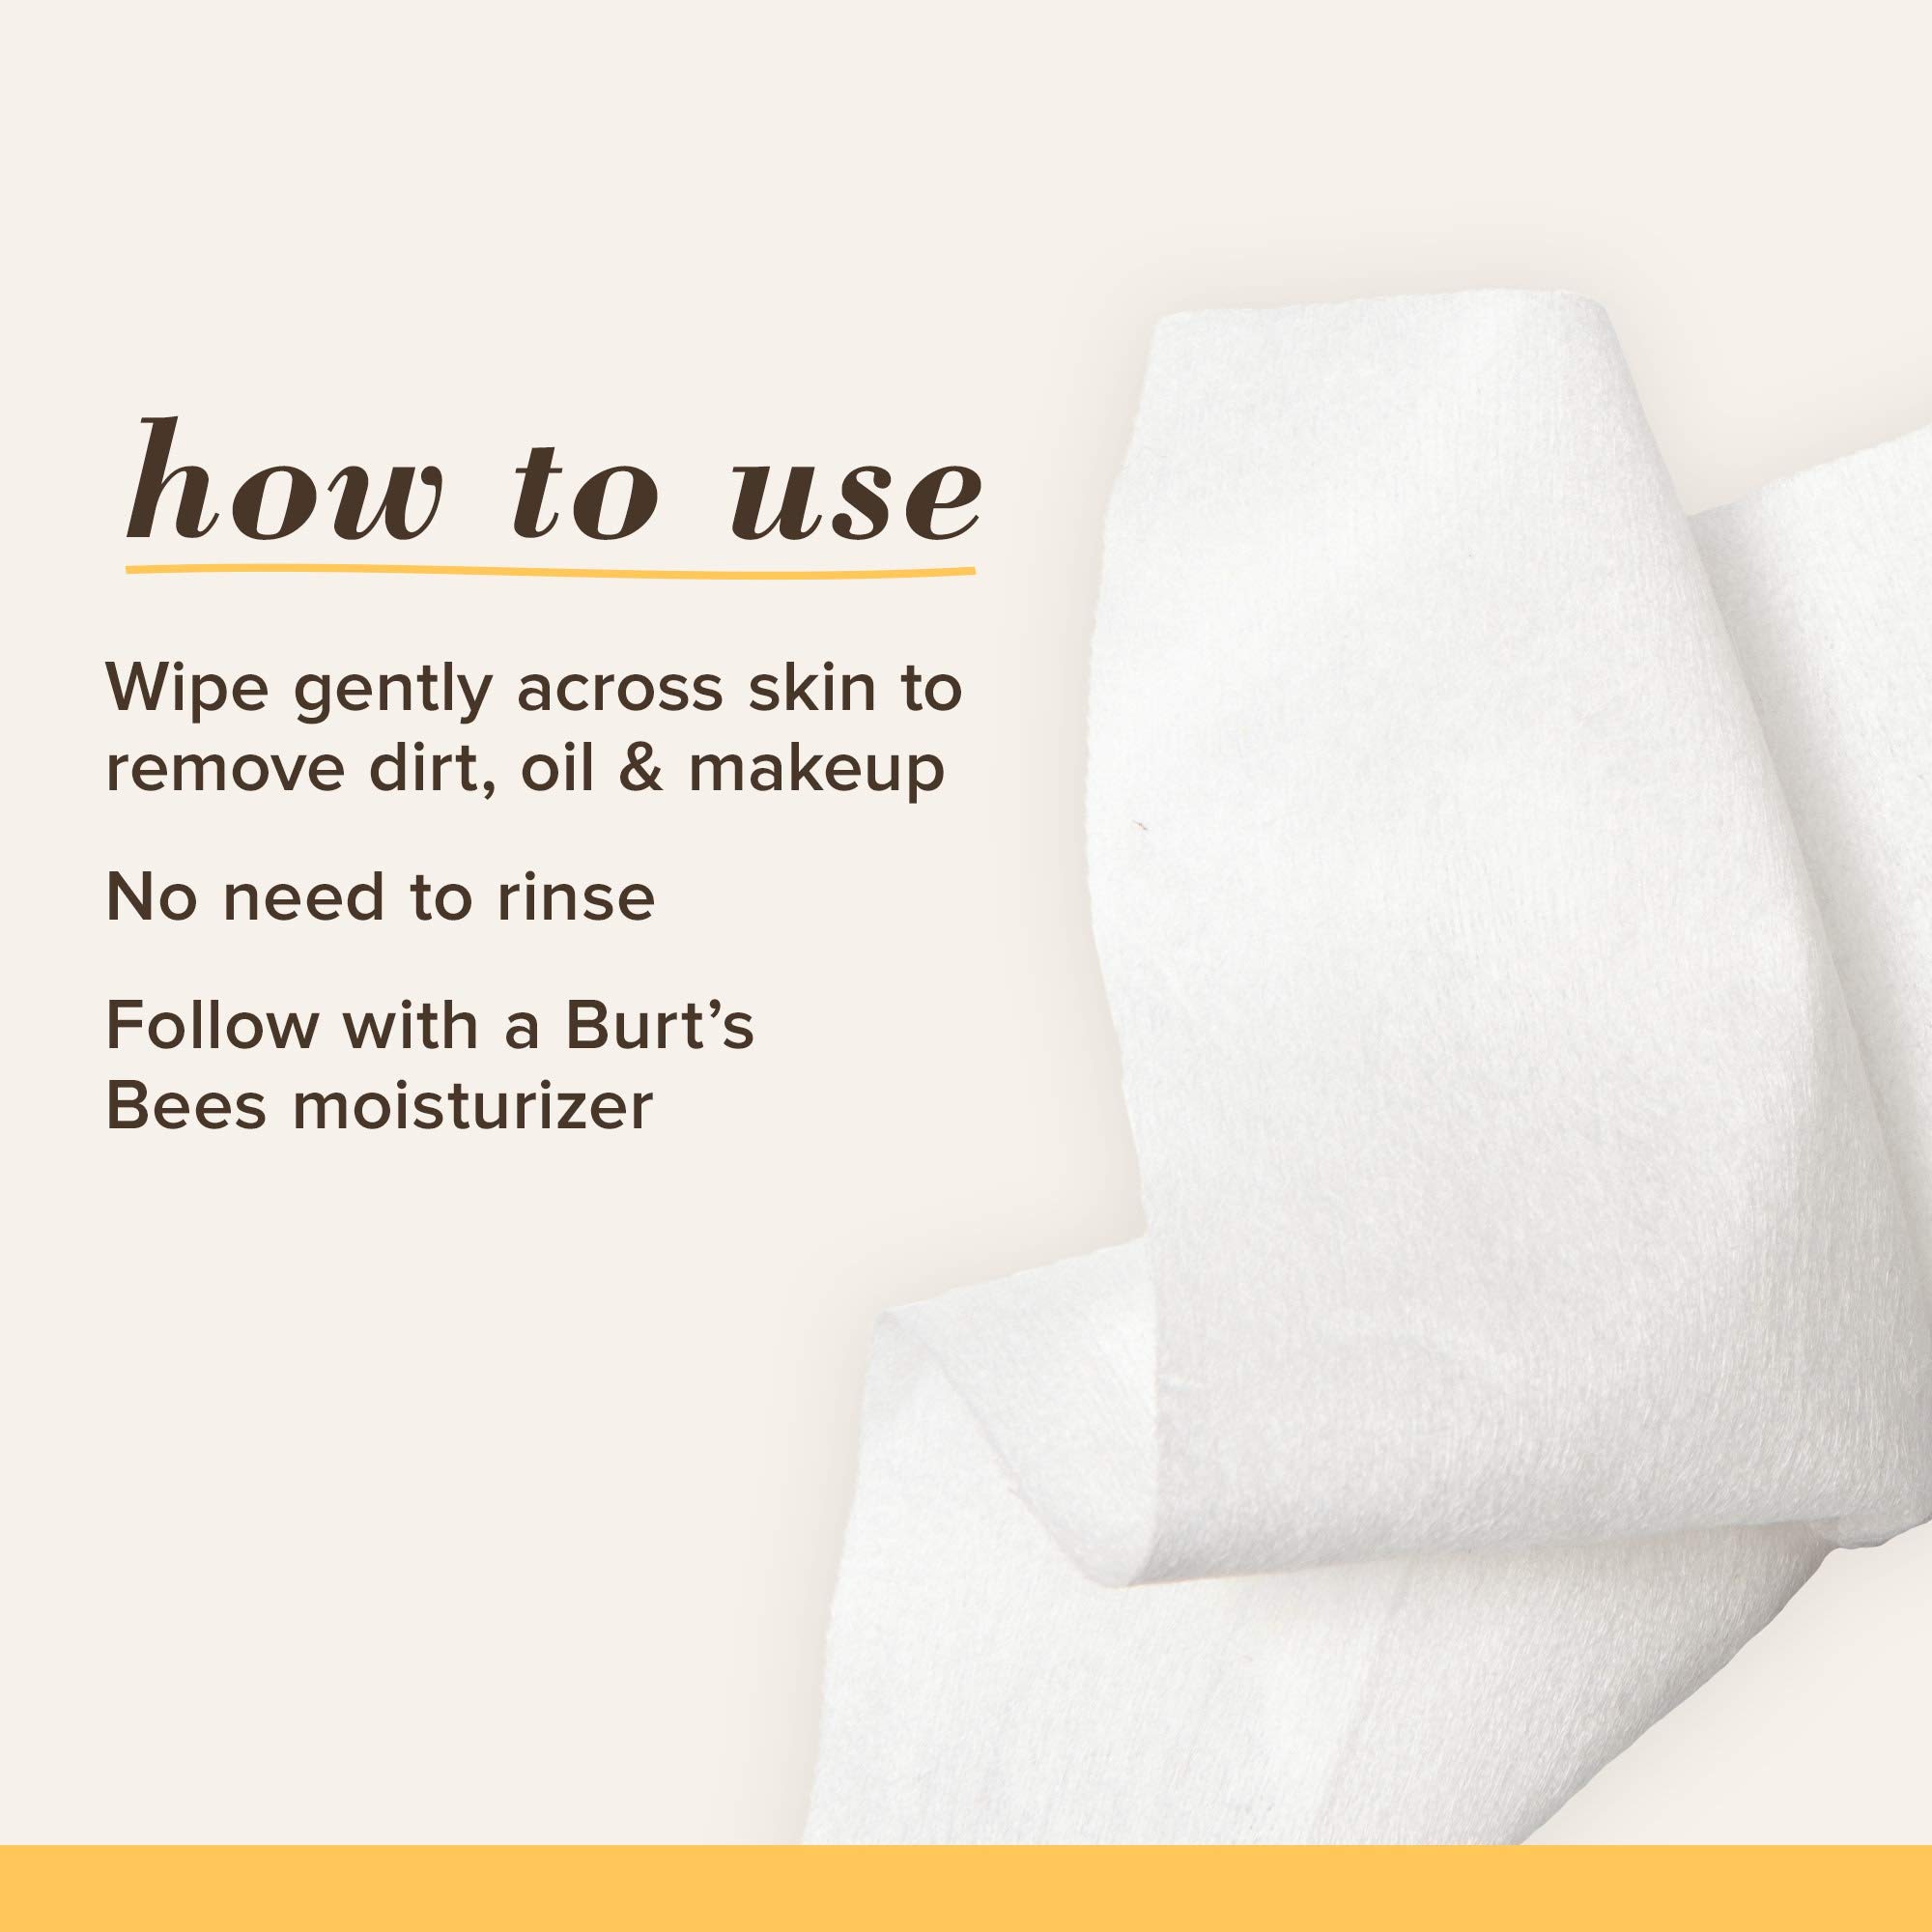 Burt's Bees Face Wipes, Makeup Remover Facial Cleansing Towelettes for All Skin Types, 3 in 1 Hydrating Micellar Cleanser with Rose Water, 30 Count (Pack Of 3)